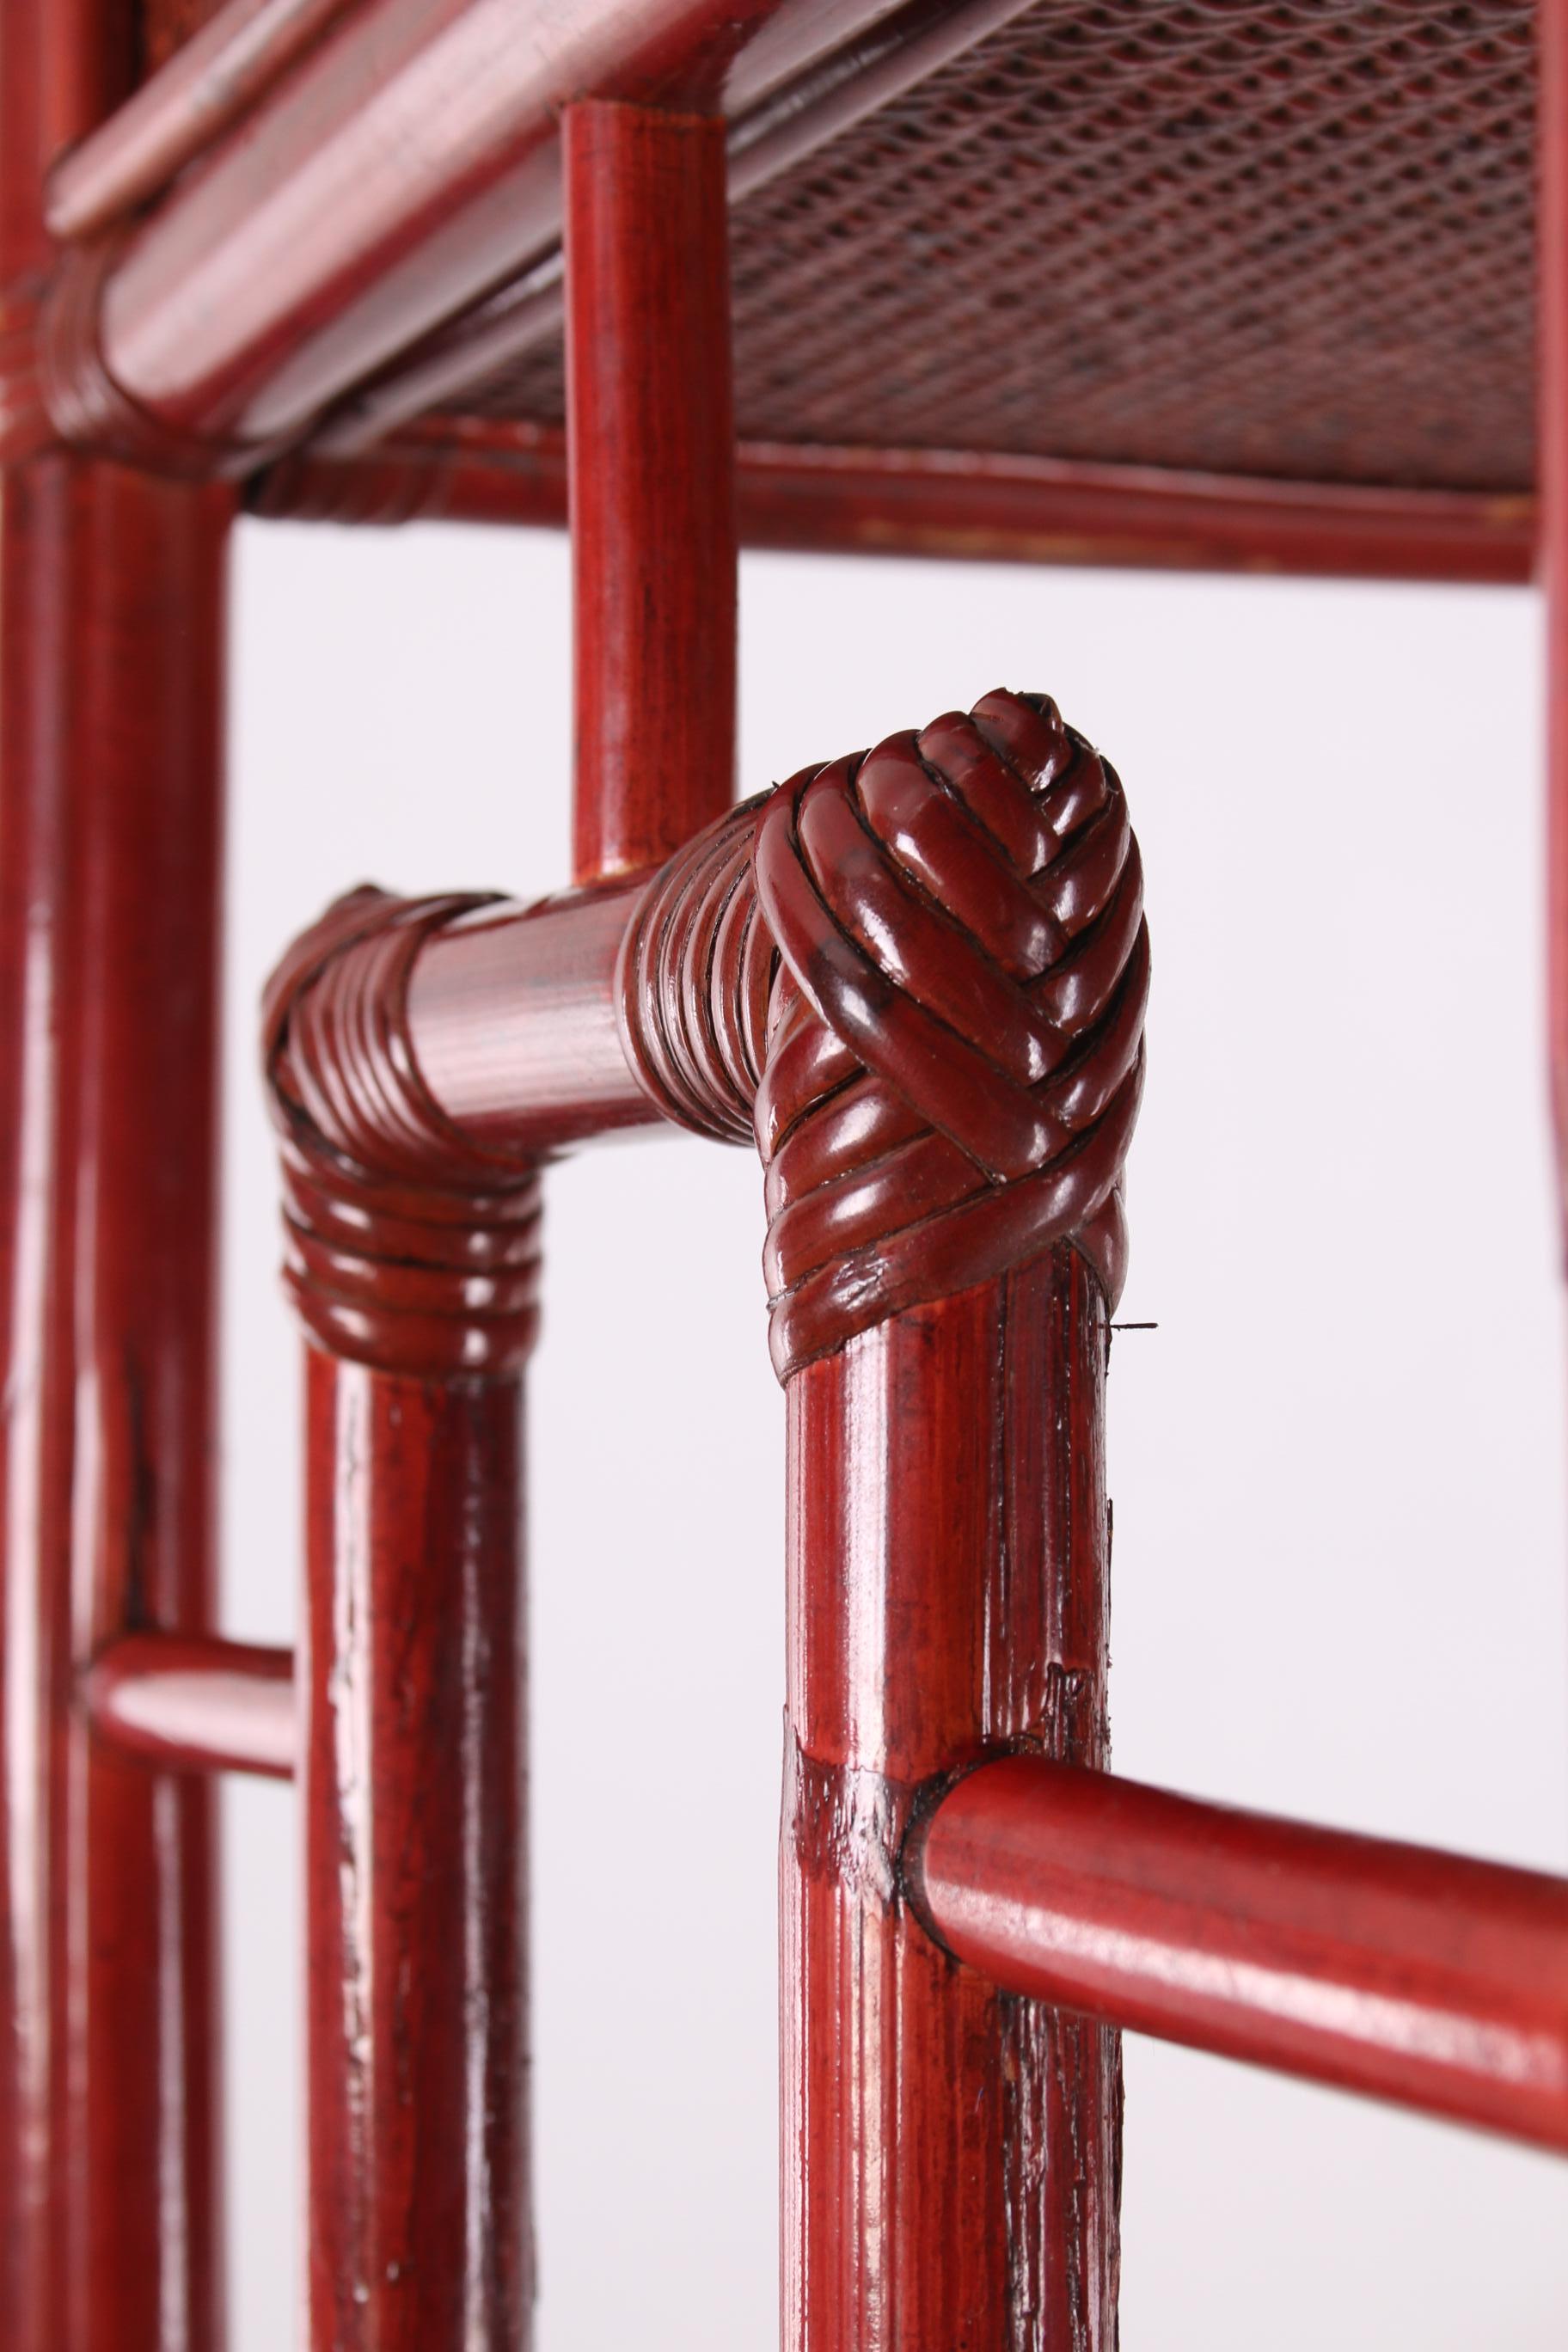 Chinese 19th Century Etagere or Room Divider Made of Bamboo, Old Red 3